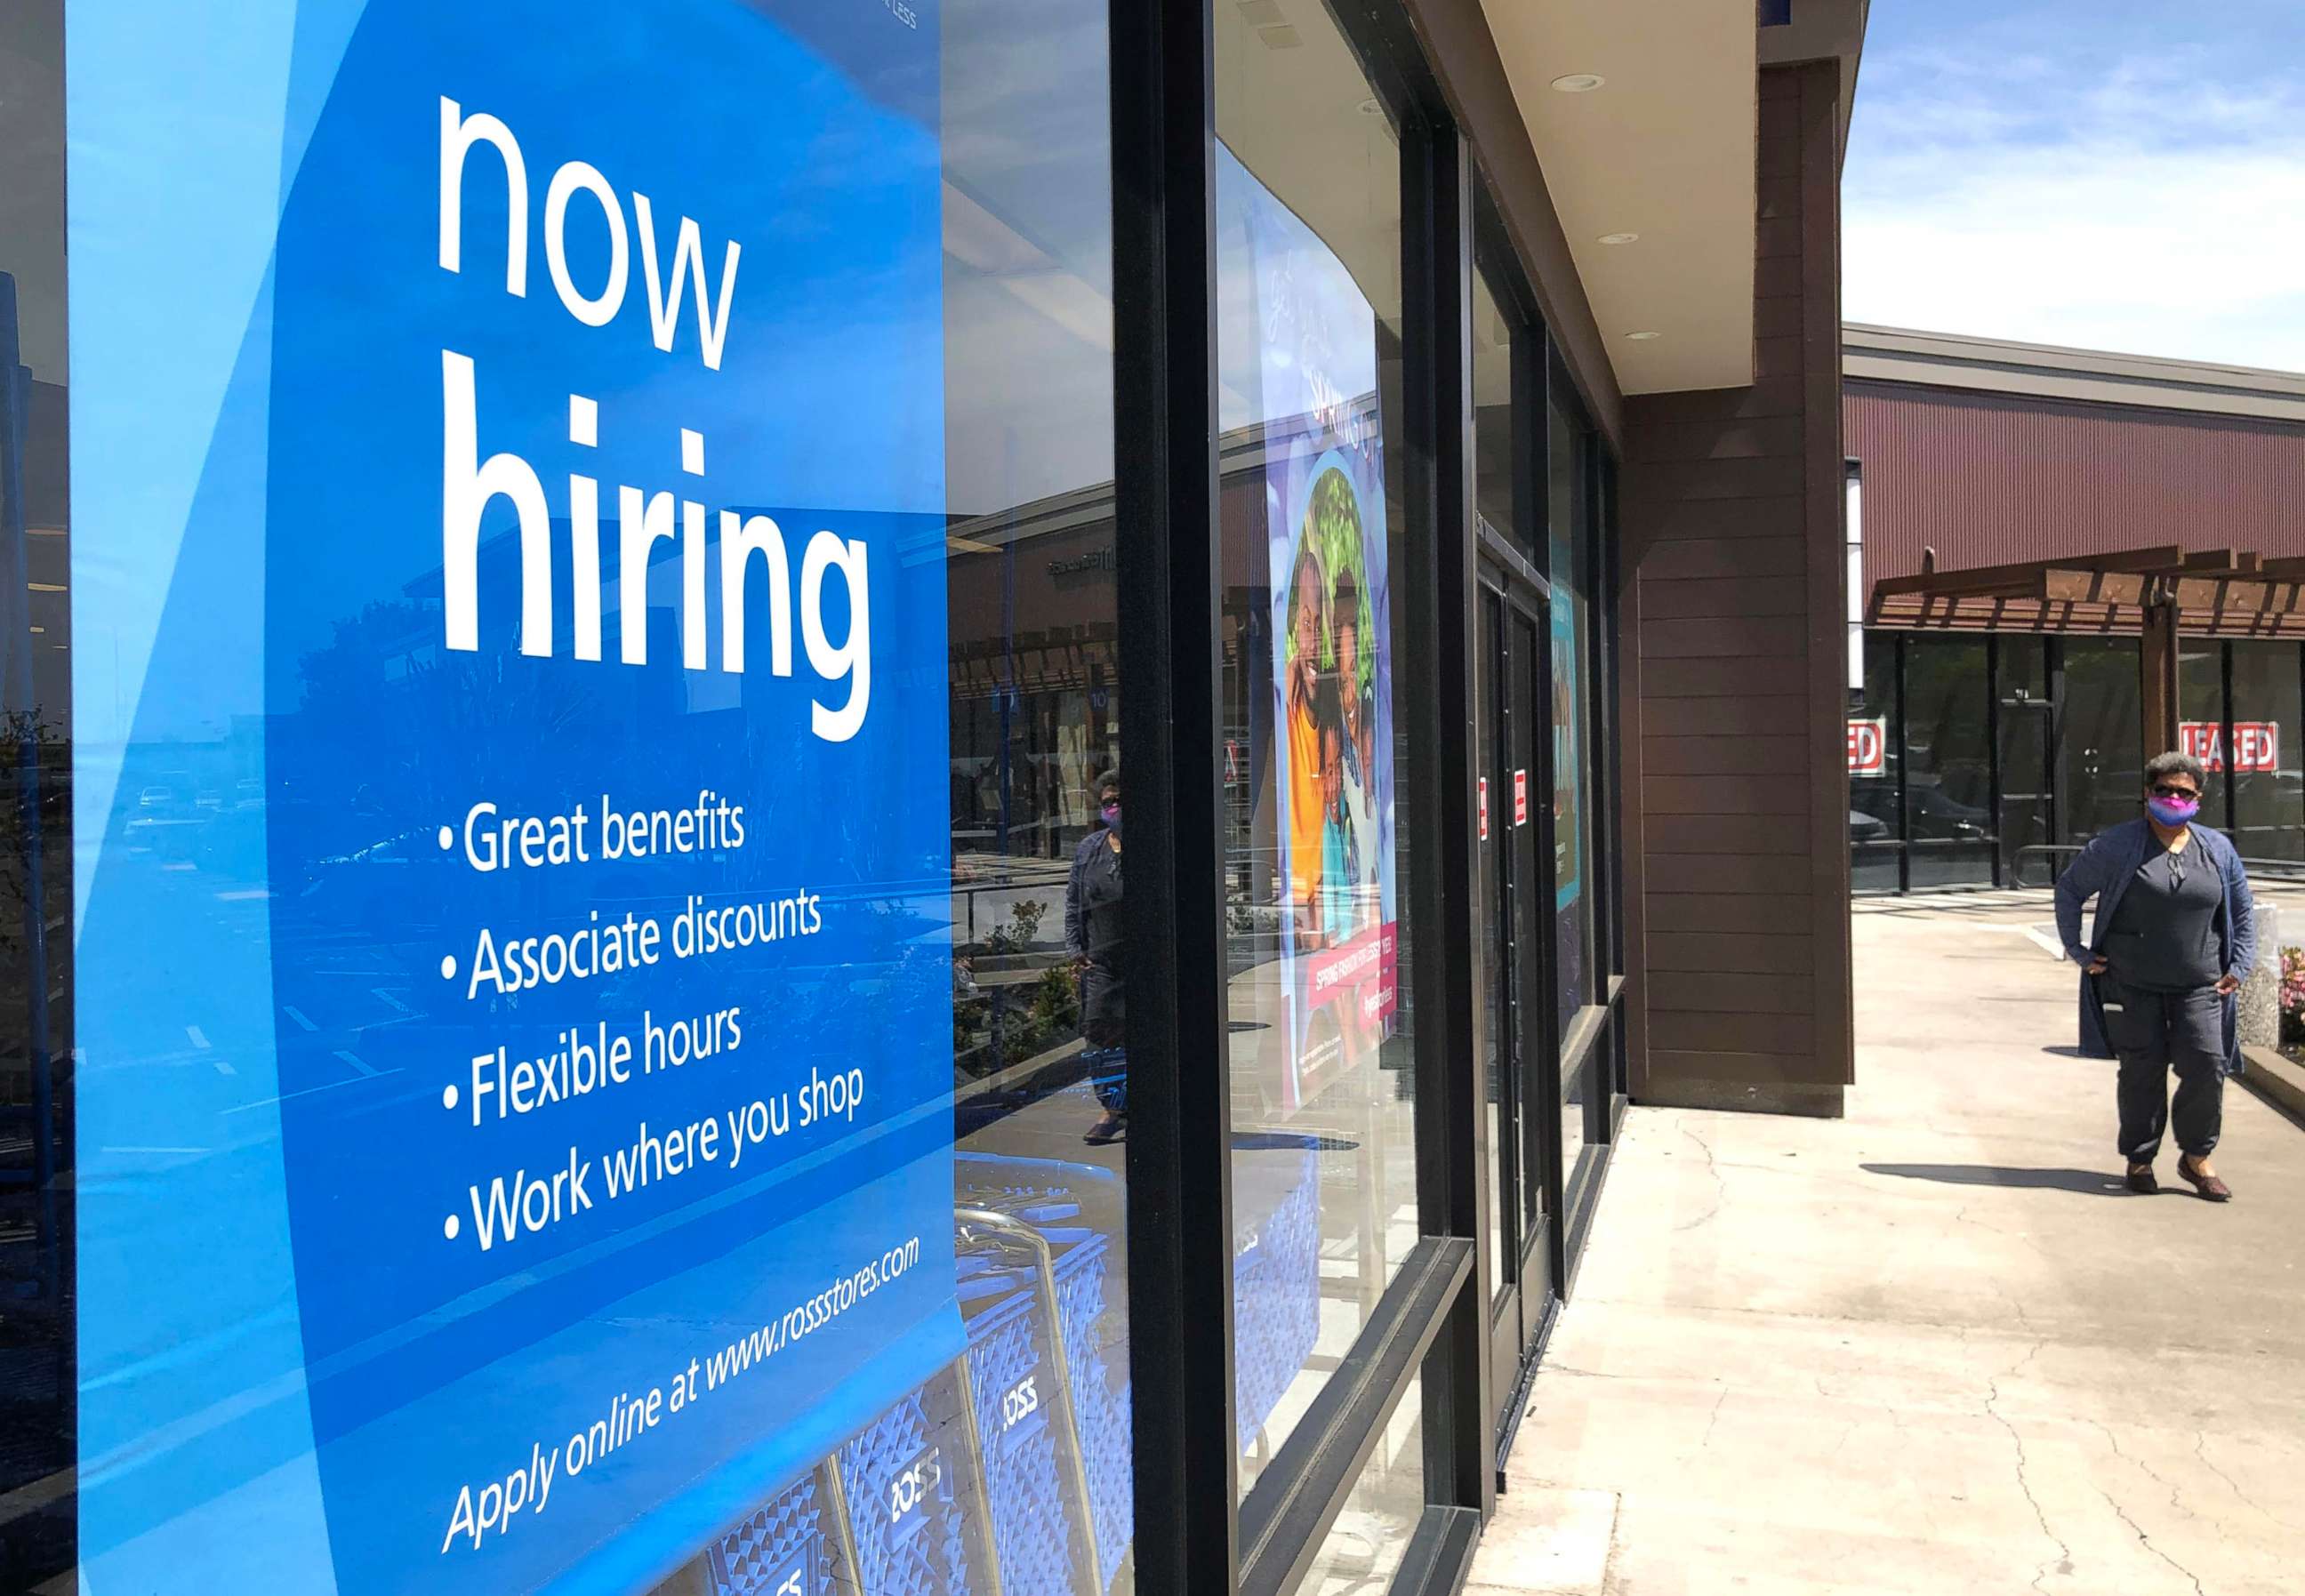 PHOTO: In this April 2, 2021, file photo, a pedestrian walks by a now hiring sign at a store in San Rafael, Calif.